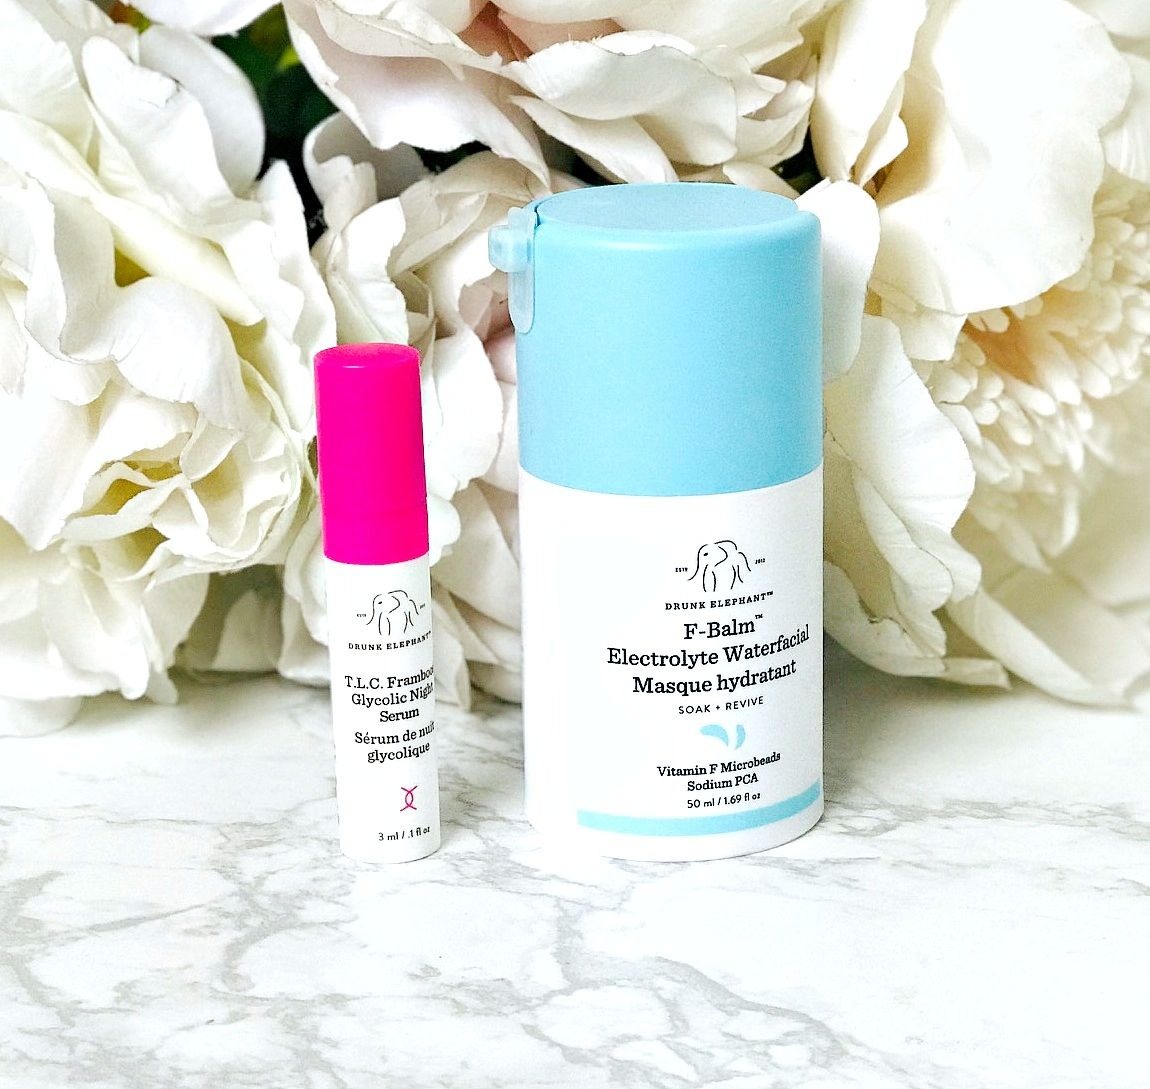 Drunk Elephant F-Balm Electrolyte Waterfacial Review, Skincare, Worth the hype?